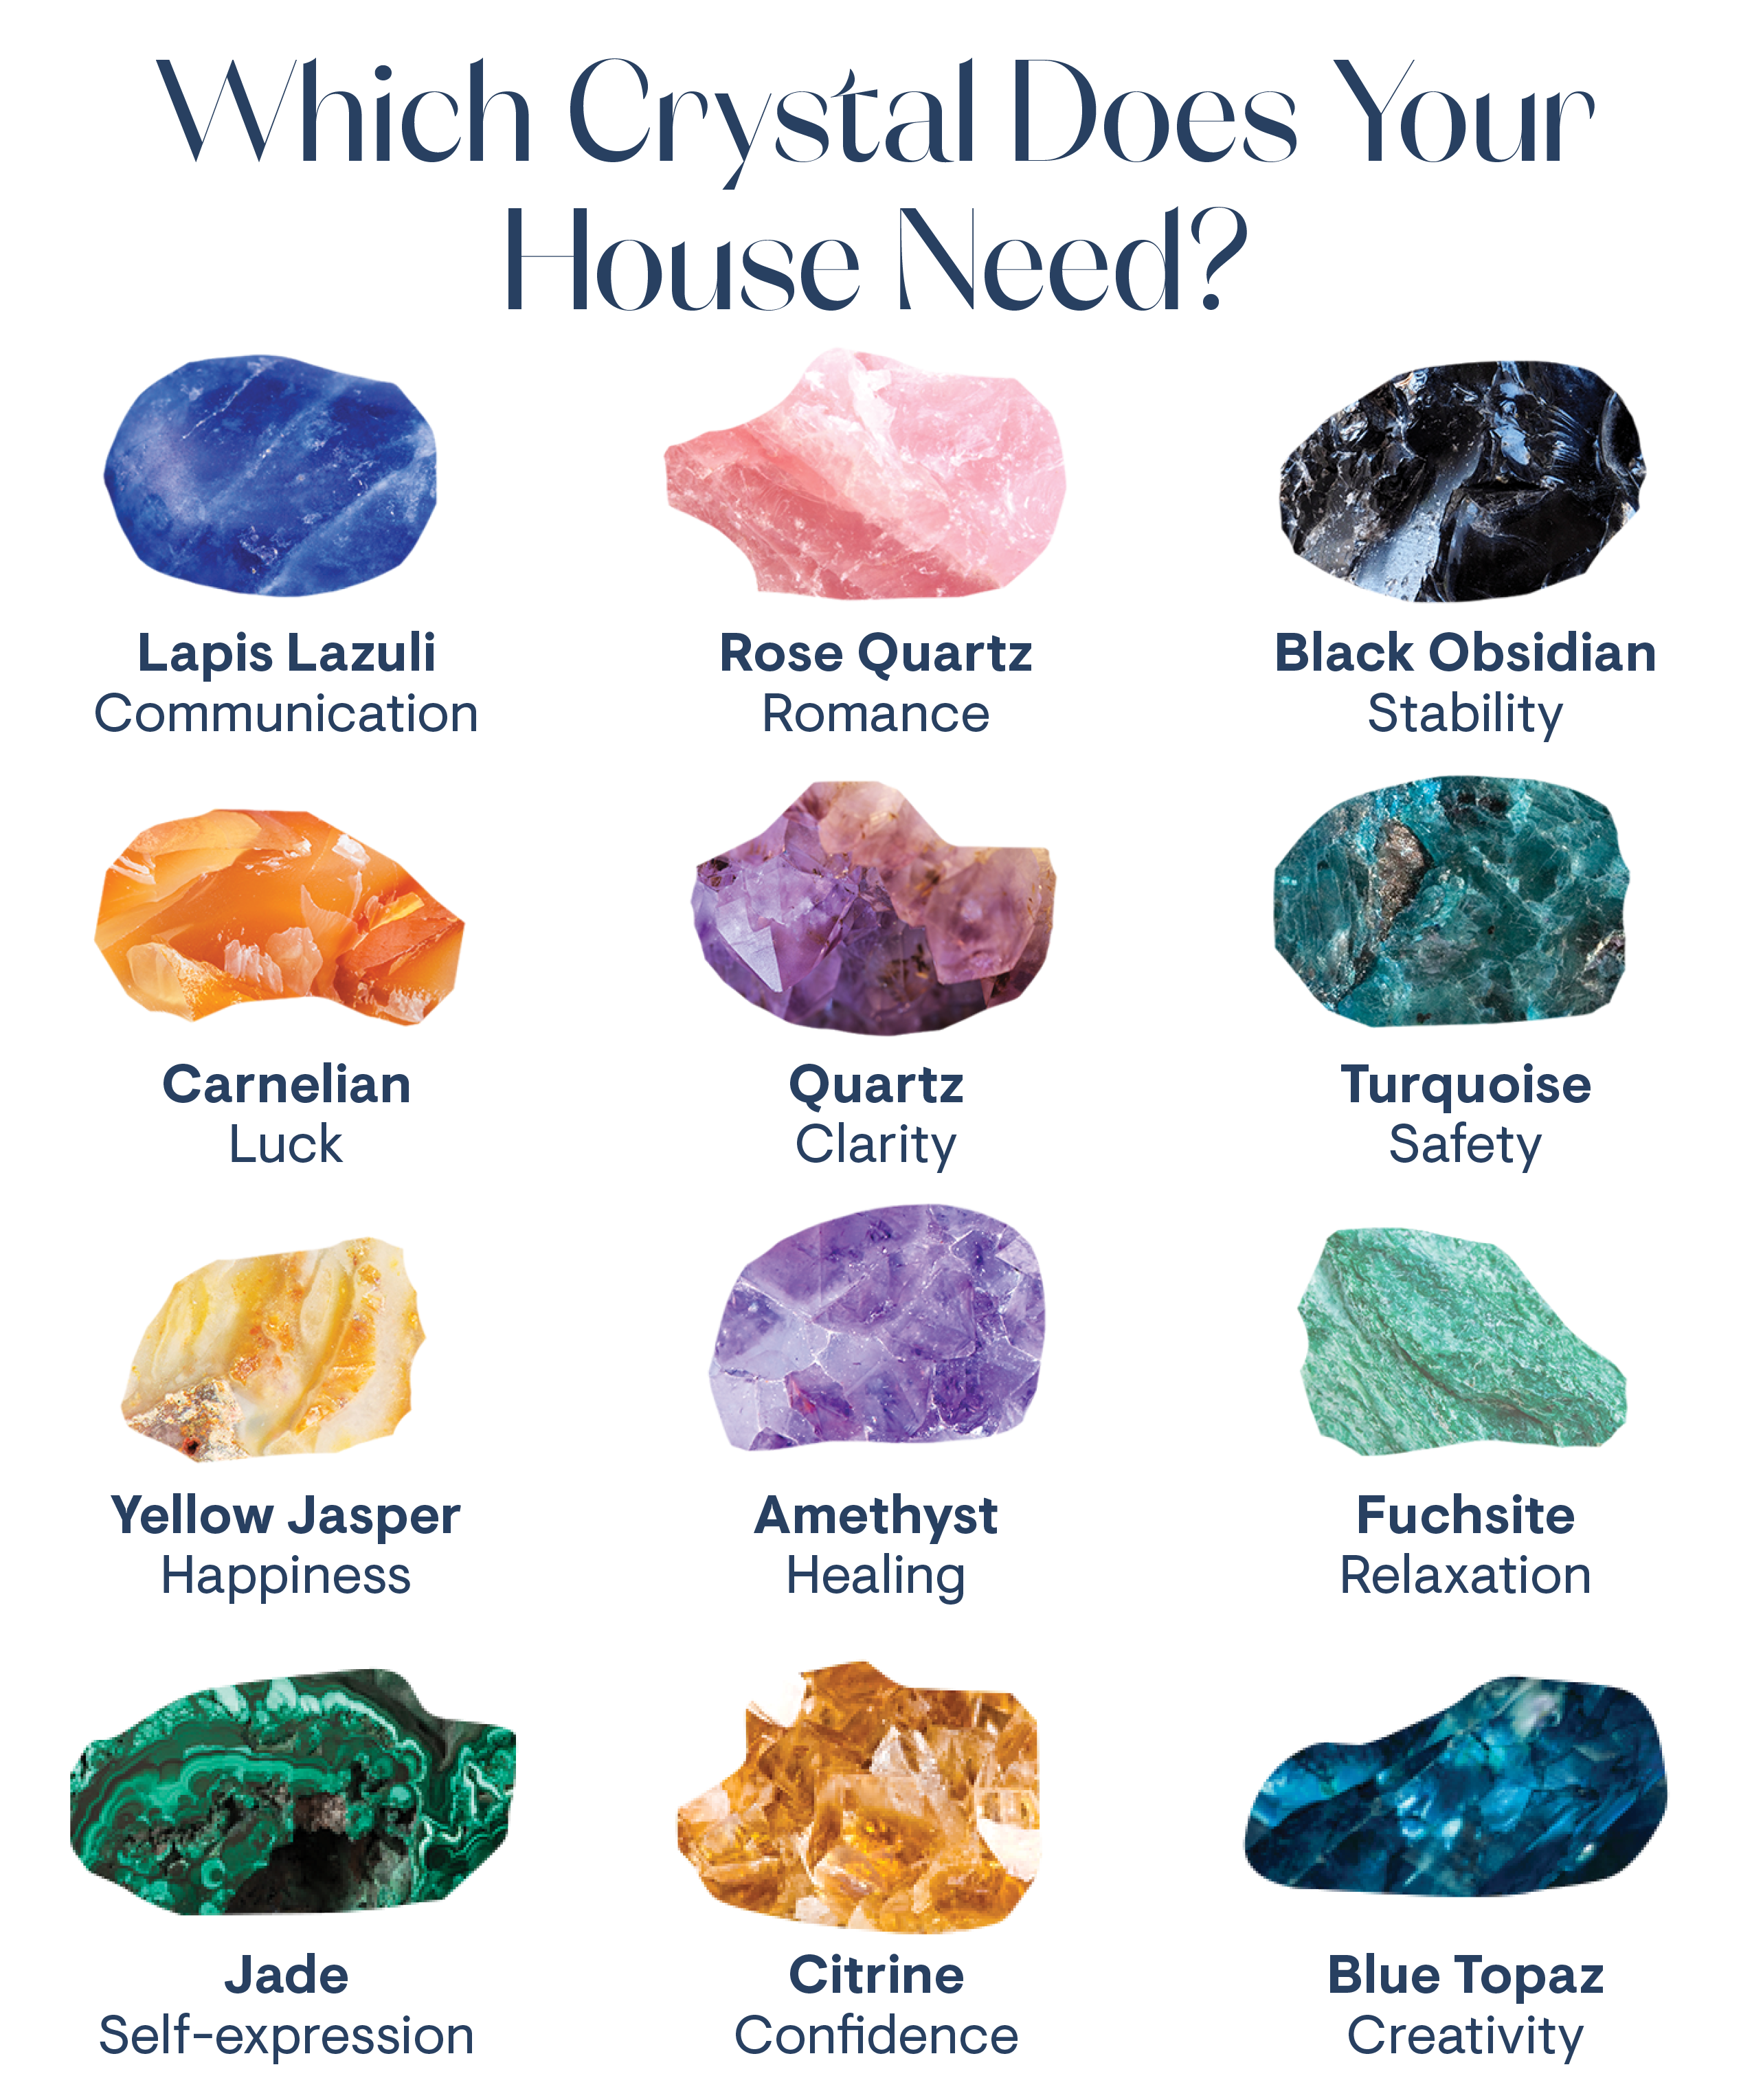 How Healing Crystals Are Used in Design - Crystal Decor Trend